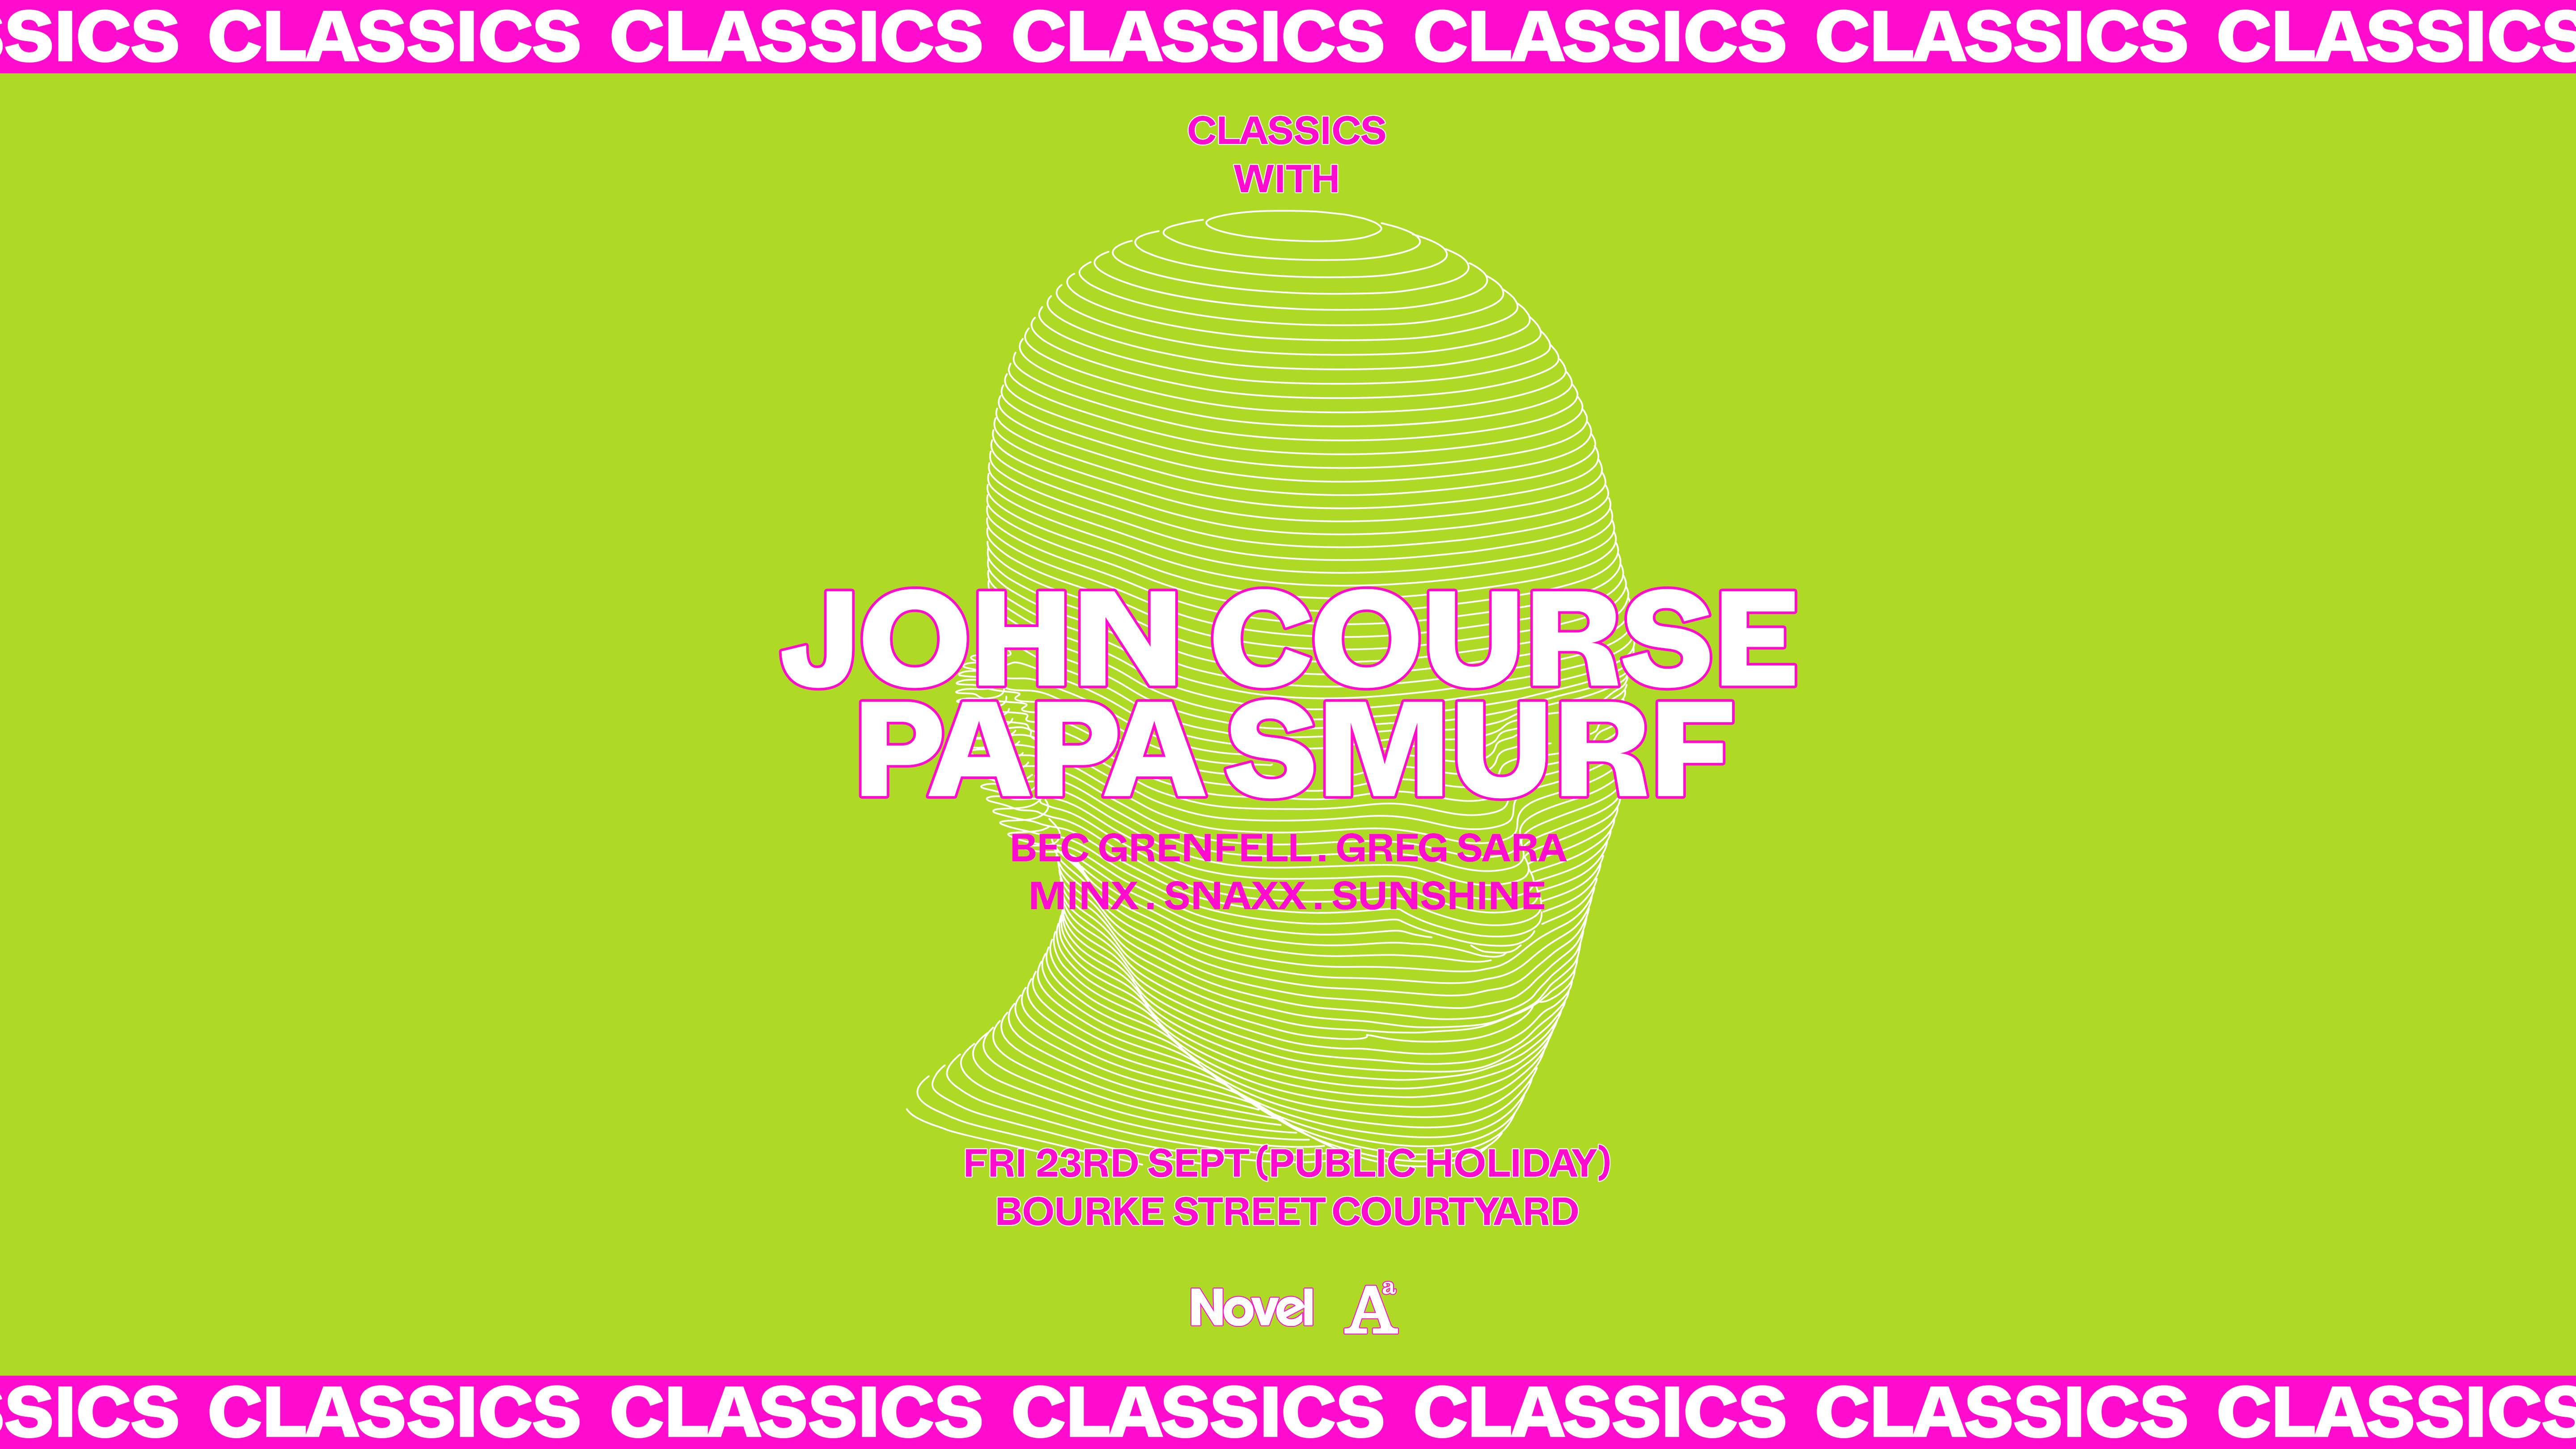 Classics with John Course & Papa Smurf (Public Holiday) - フライヤー表